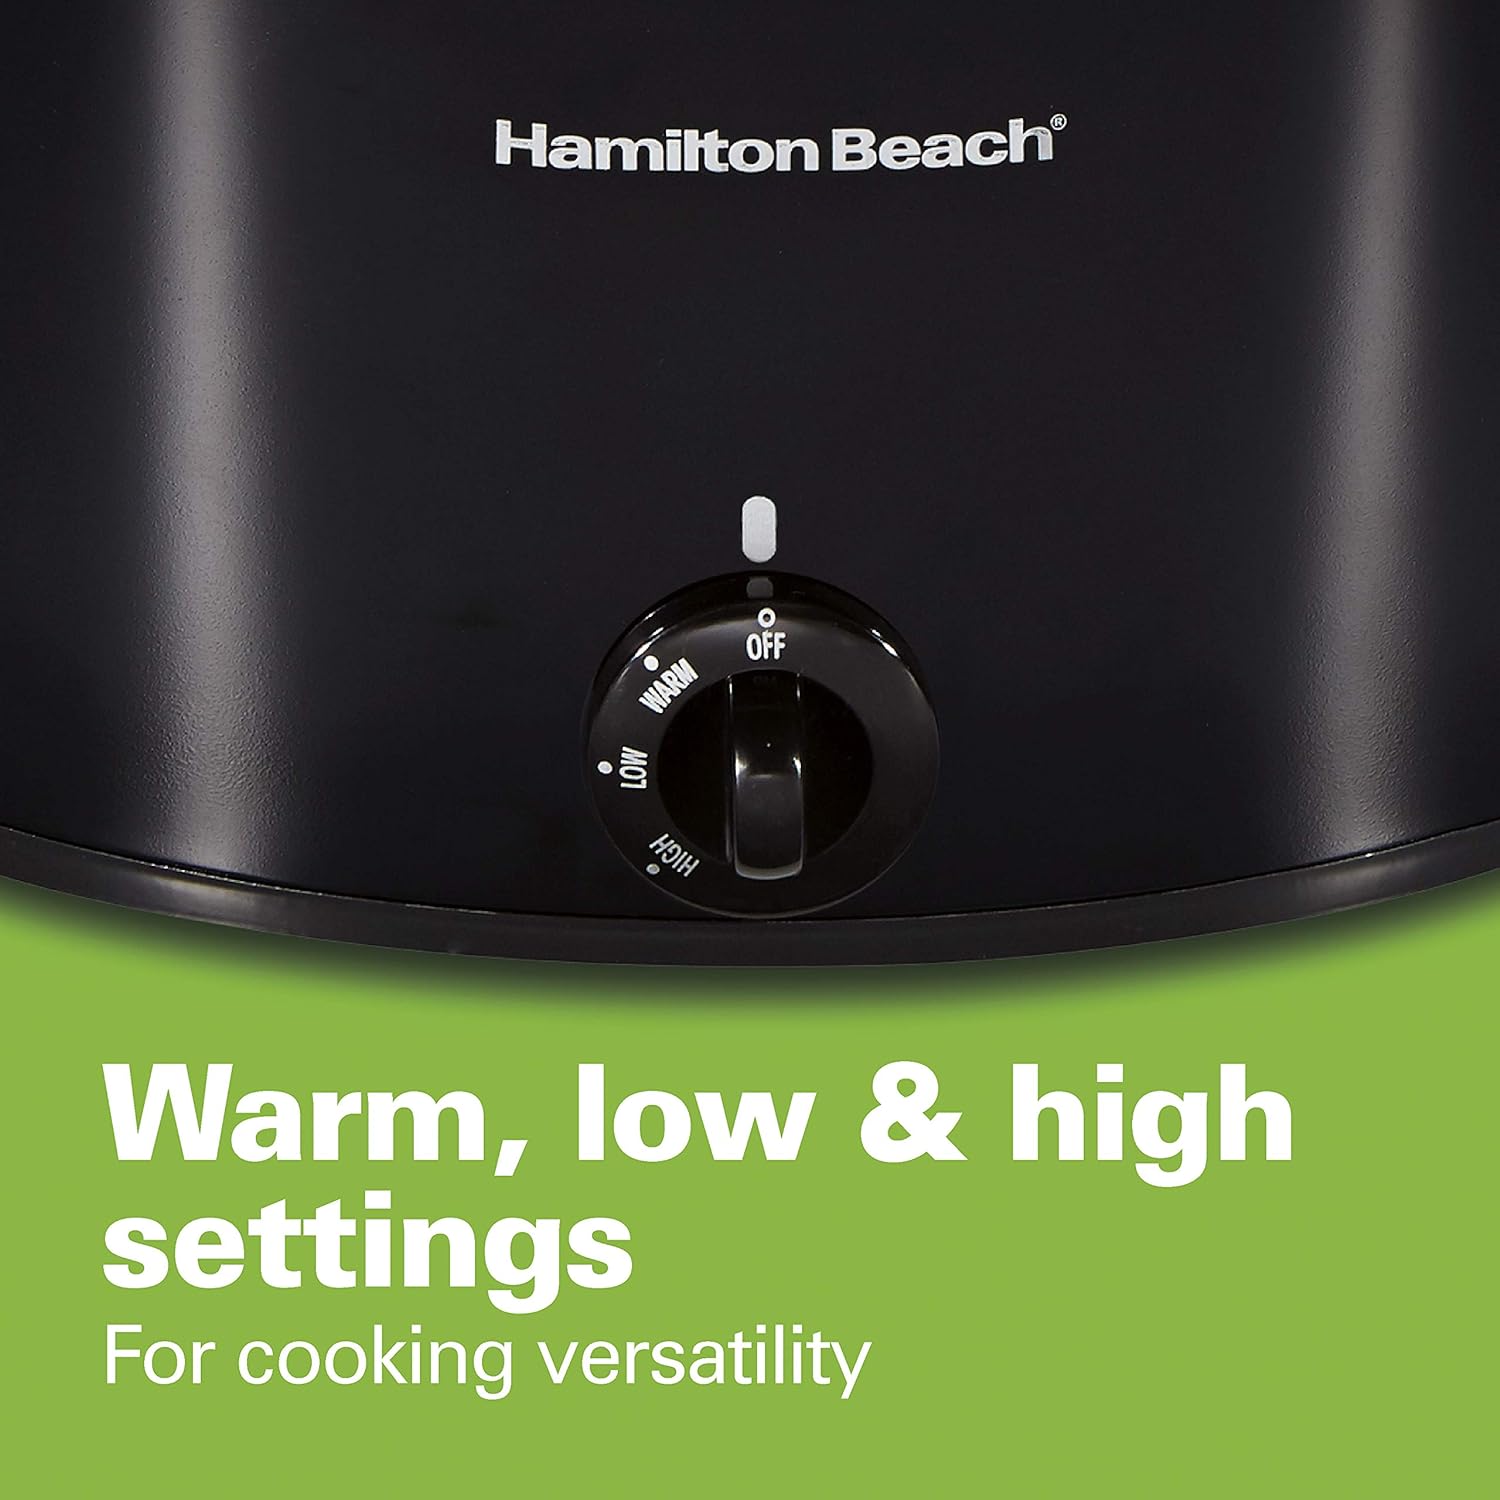 Hamilton Beach Sear  Cook Stock Pot Slow Cooker, Silver (33196)  Slow Cooker, Extra Large 10 Quart, Stay or Go Portable With Lid Lock, Dishwasher Safe Crock, Black (33195)